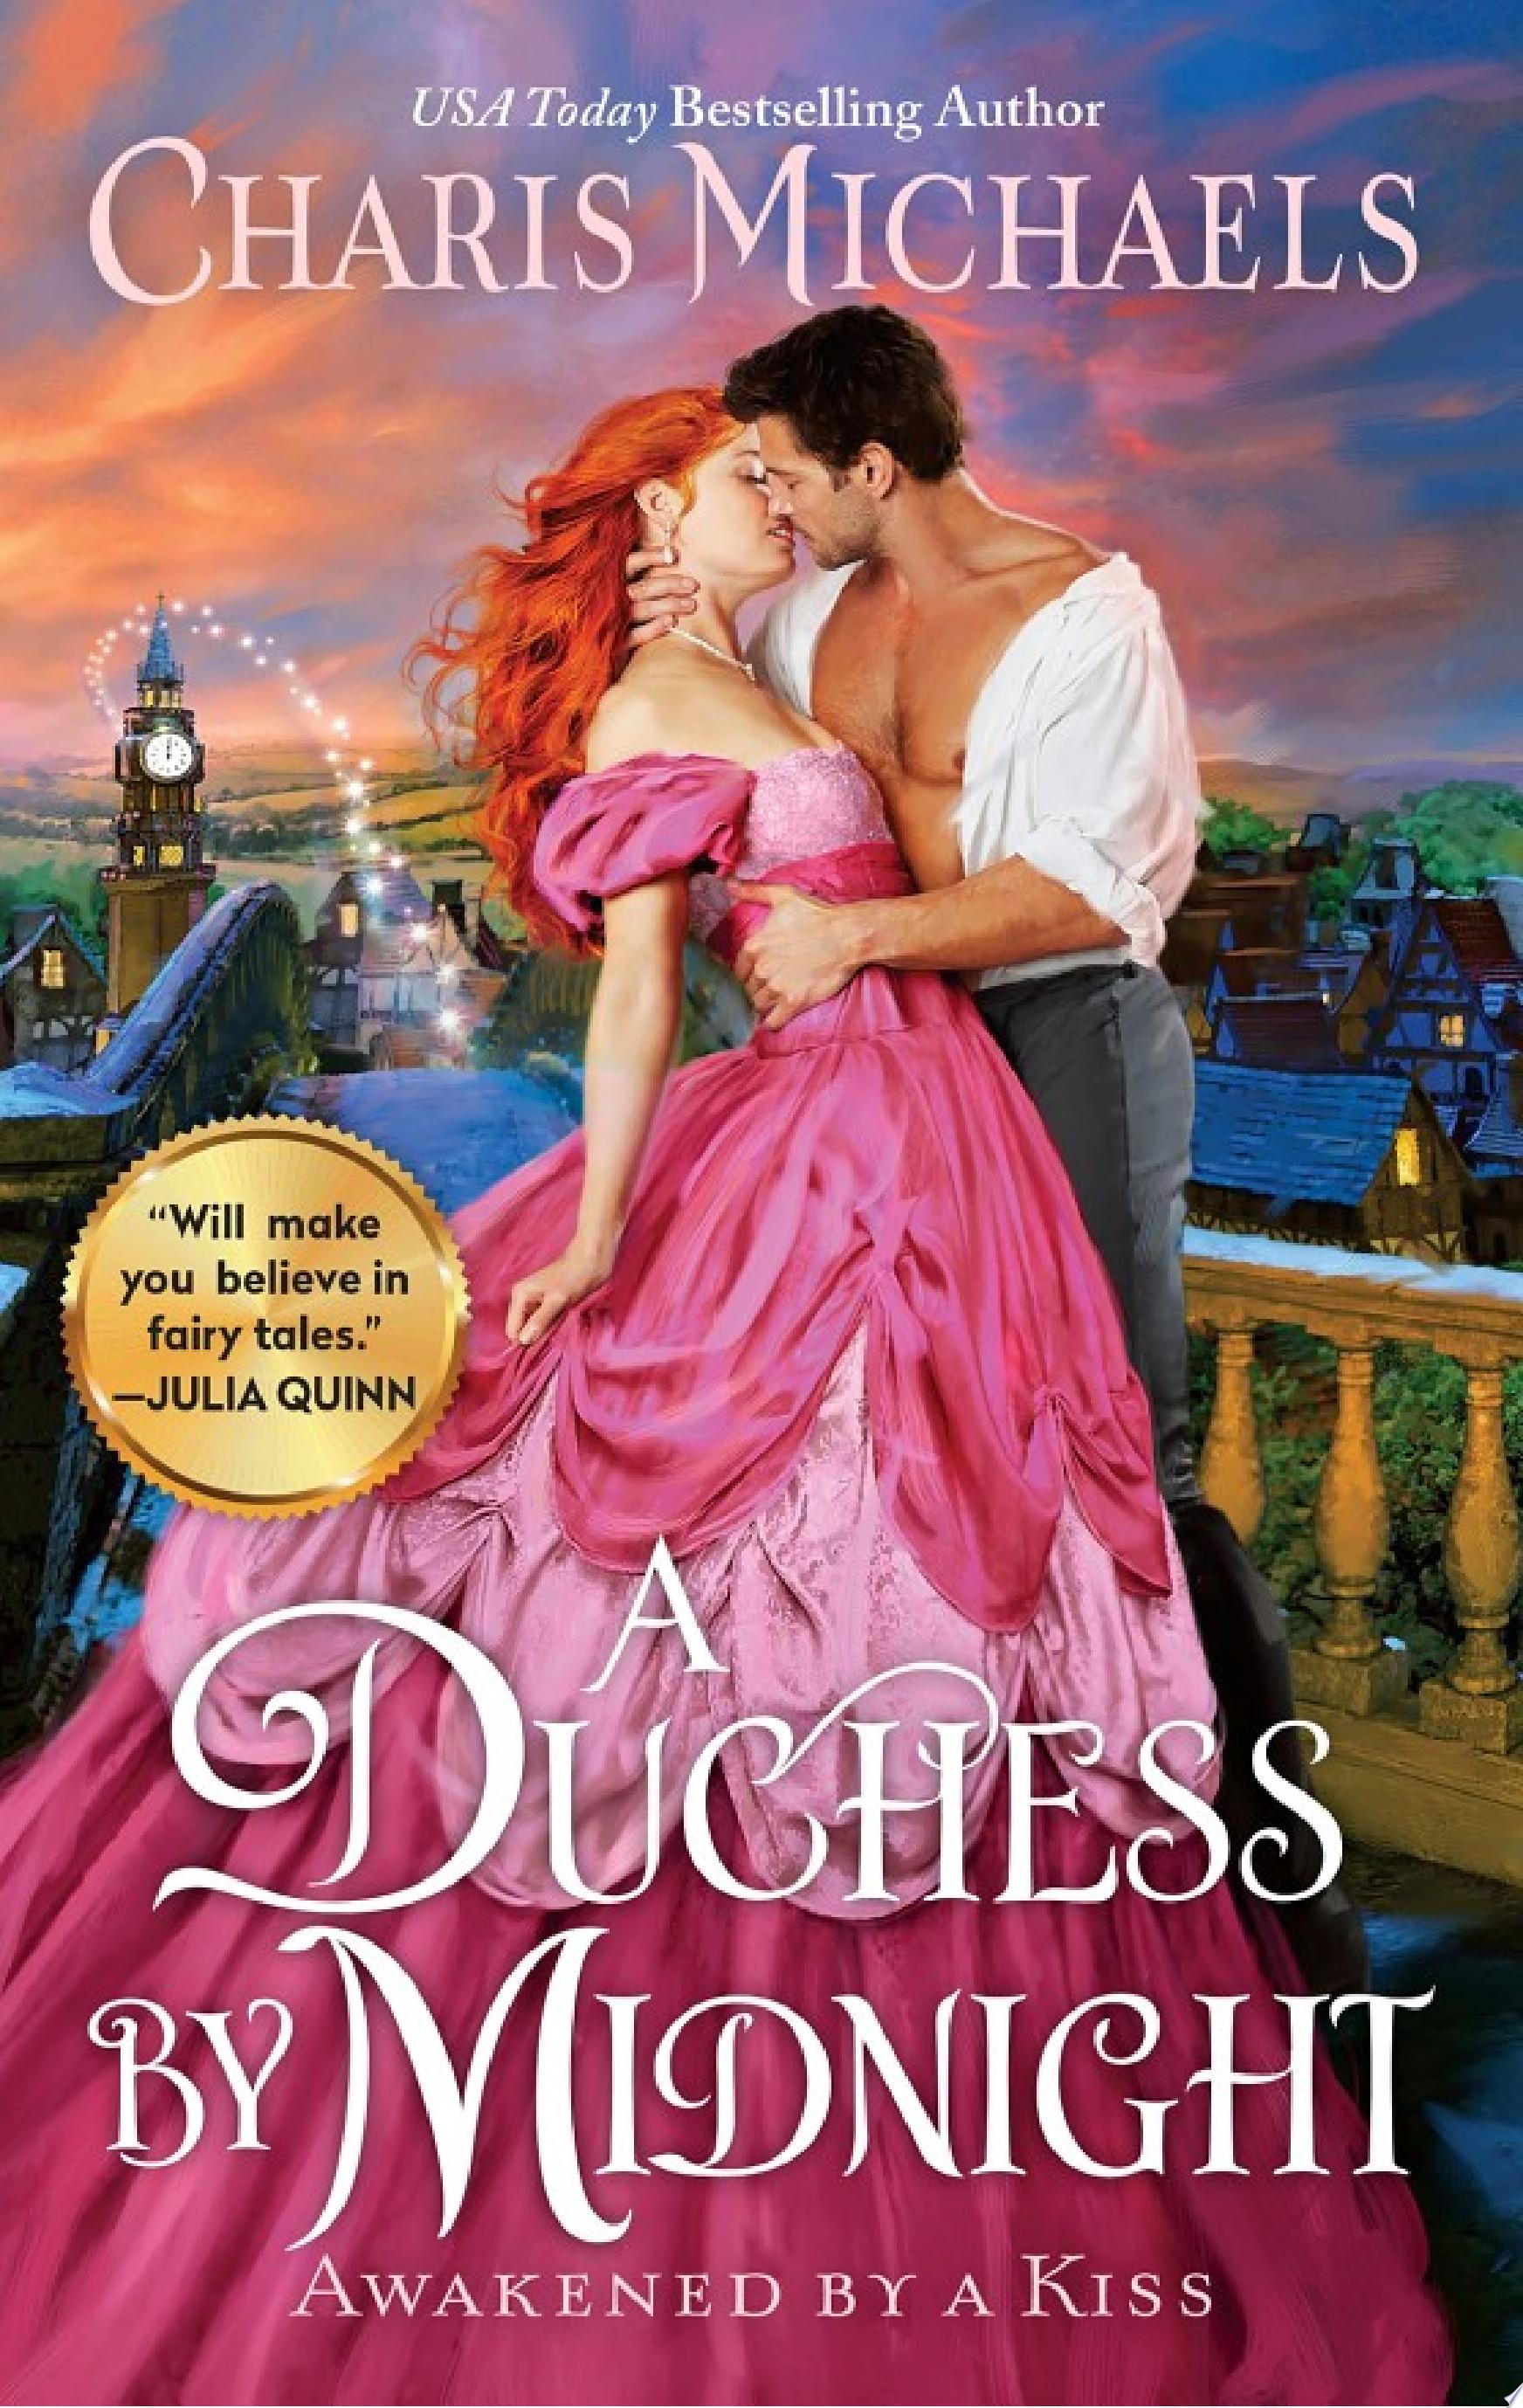 Image for "A Duchess by Midnight"